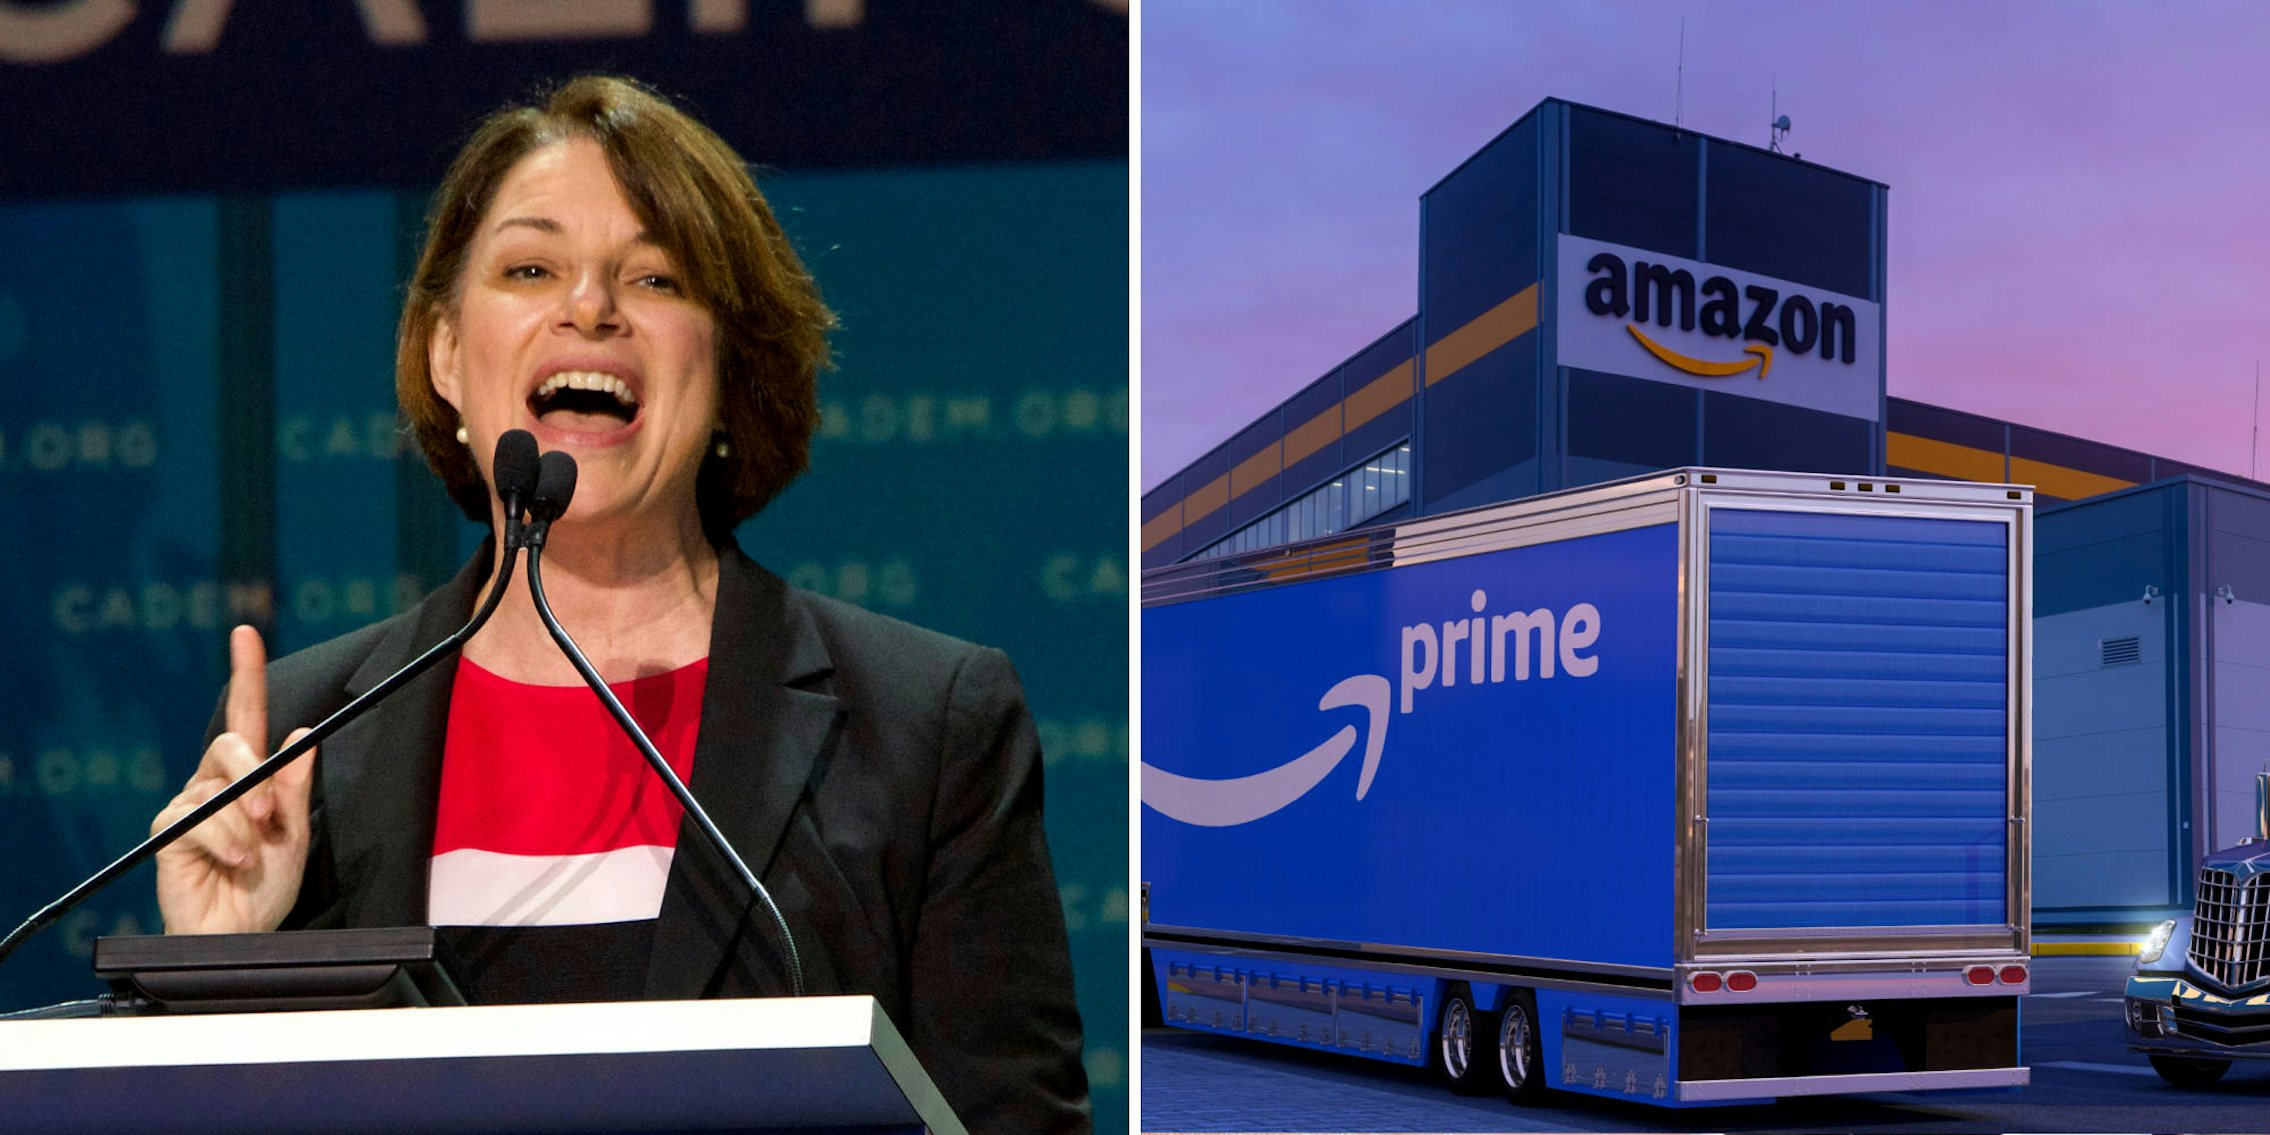 Presidential candidate Amy Klobuchar speaking into microphone (l) Amazon Prime truck and Amazon building with sky (r)